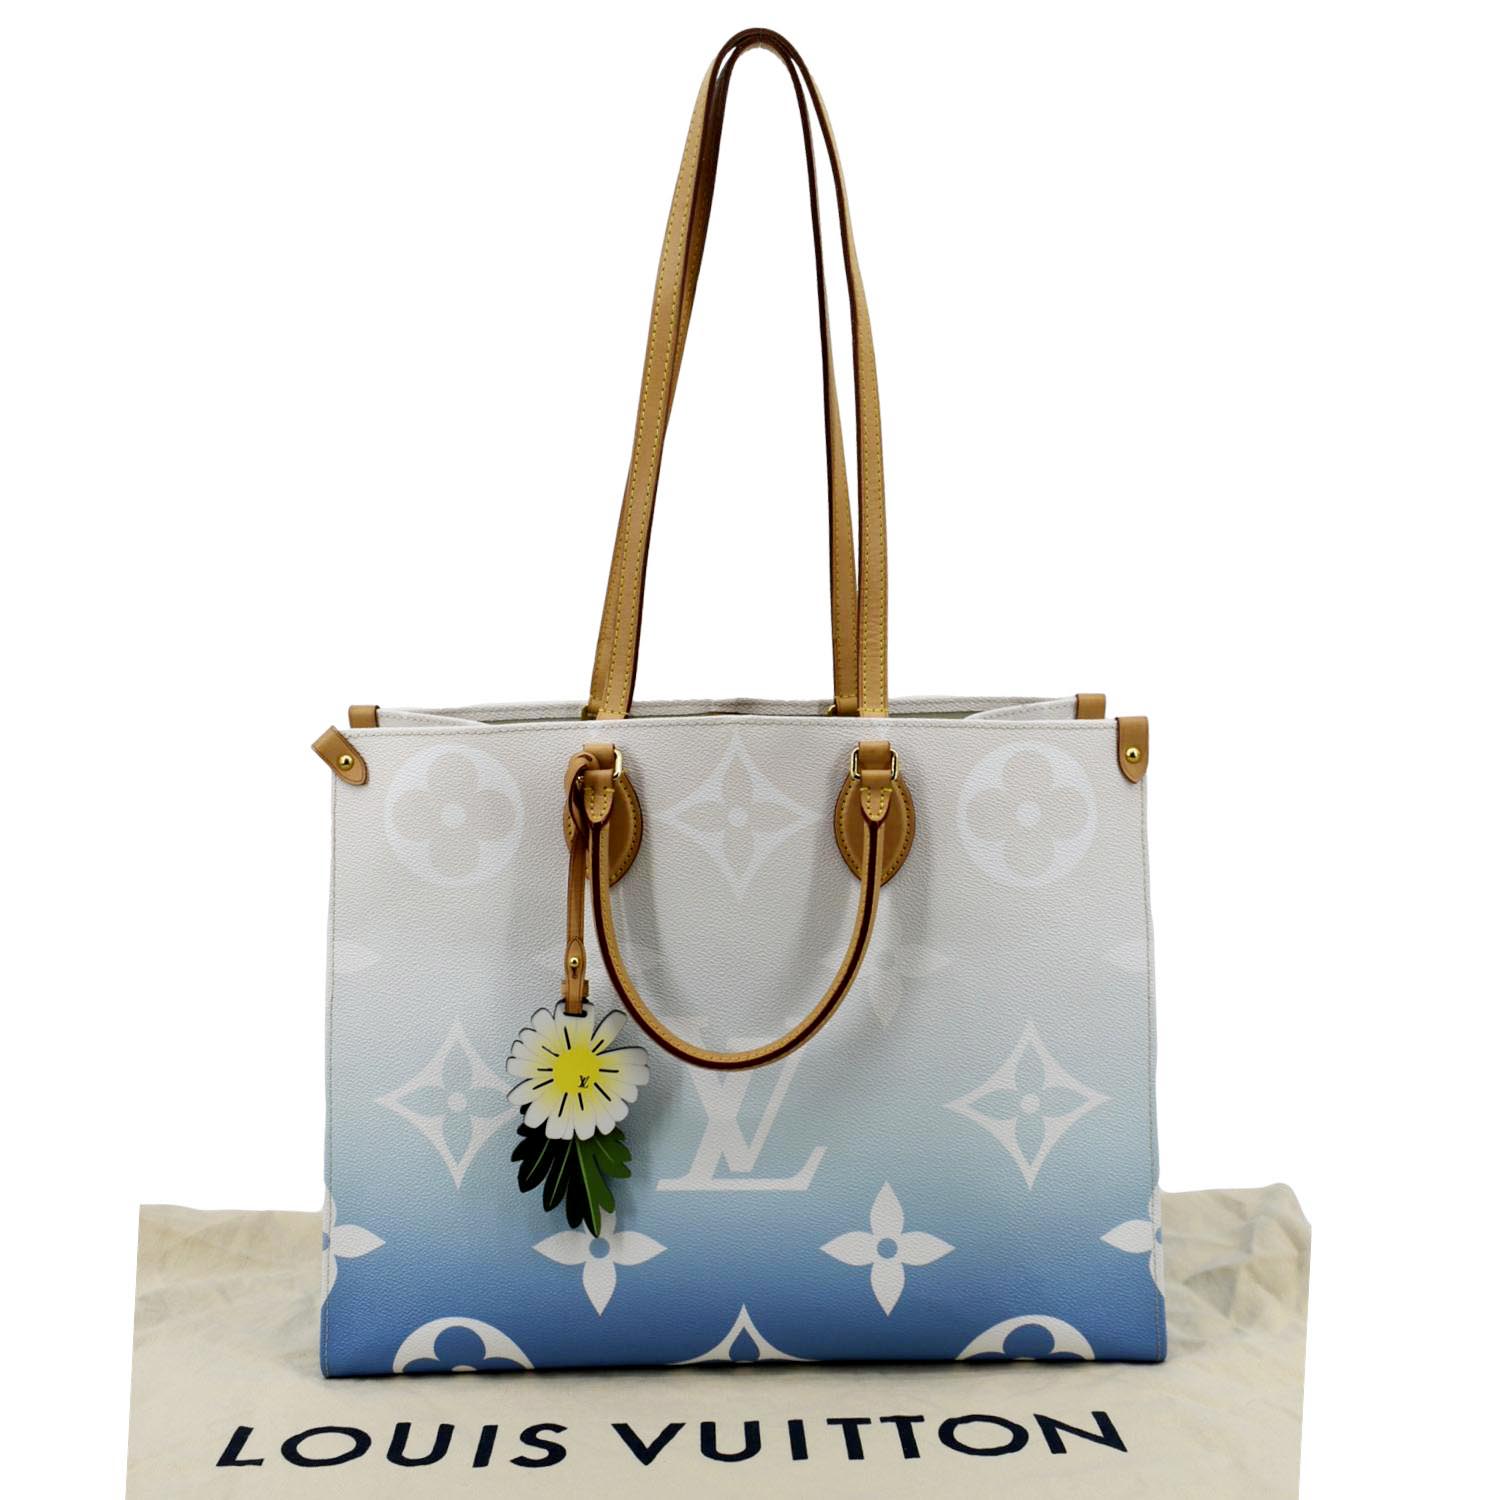 Louis Vuitton OnTheGo GM By the Pool Miami Resort Bag Giant